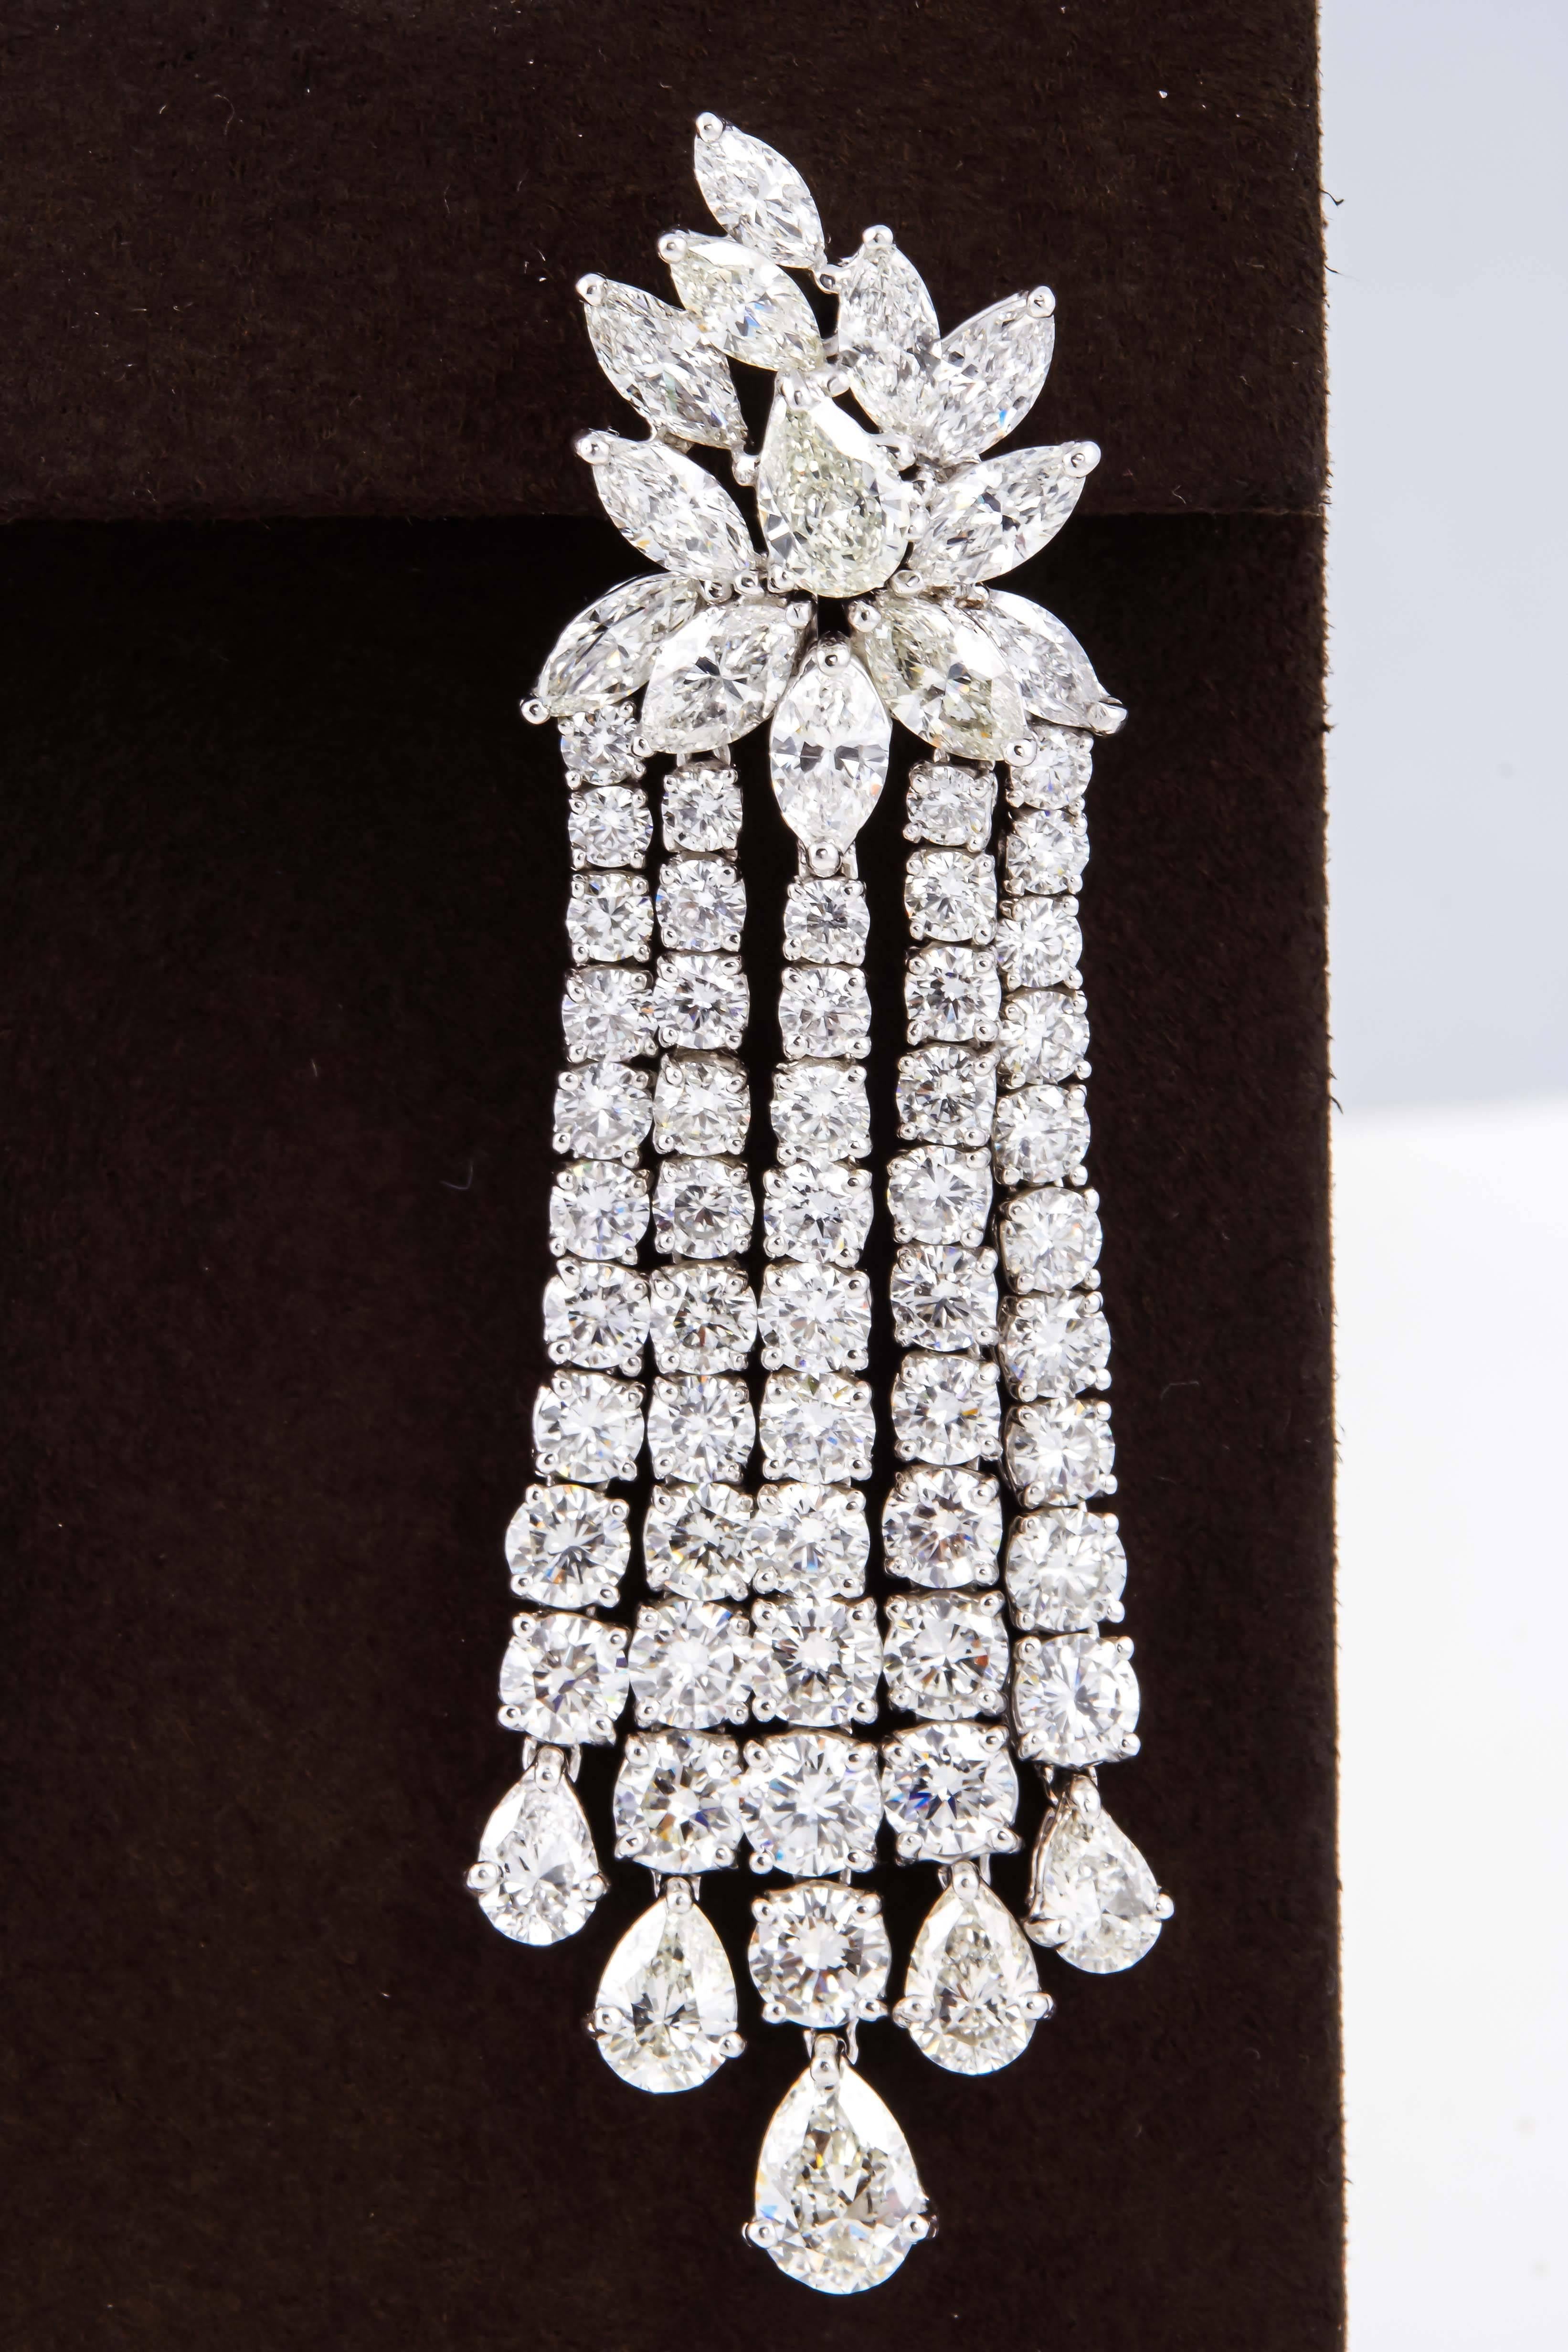 
Just under 30 carats of diamonds!

A FABULOUS pair of important diamond earrings!

29.15 carats of F/G VS diamonds set in platinum.

Approximately 2.6 inches in length.
